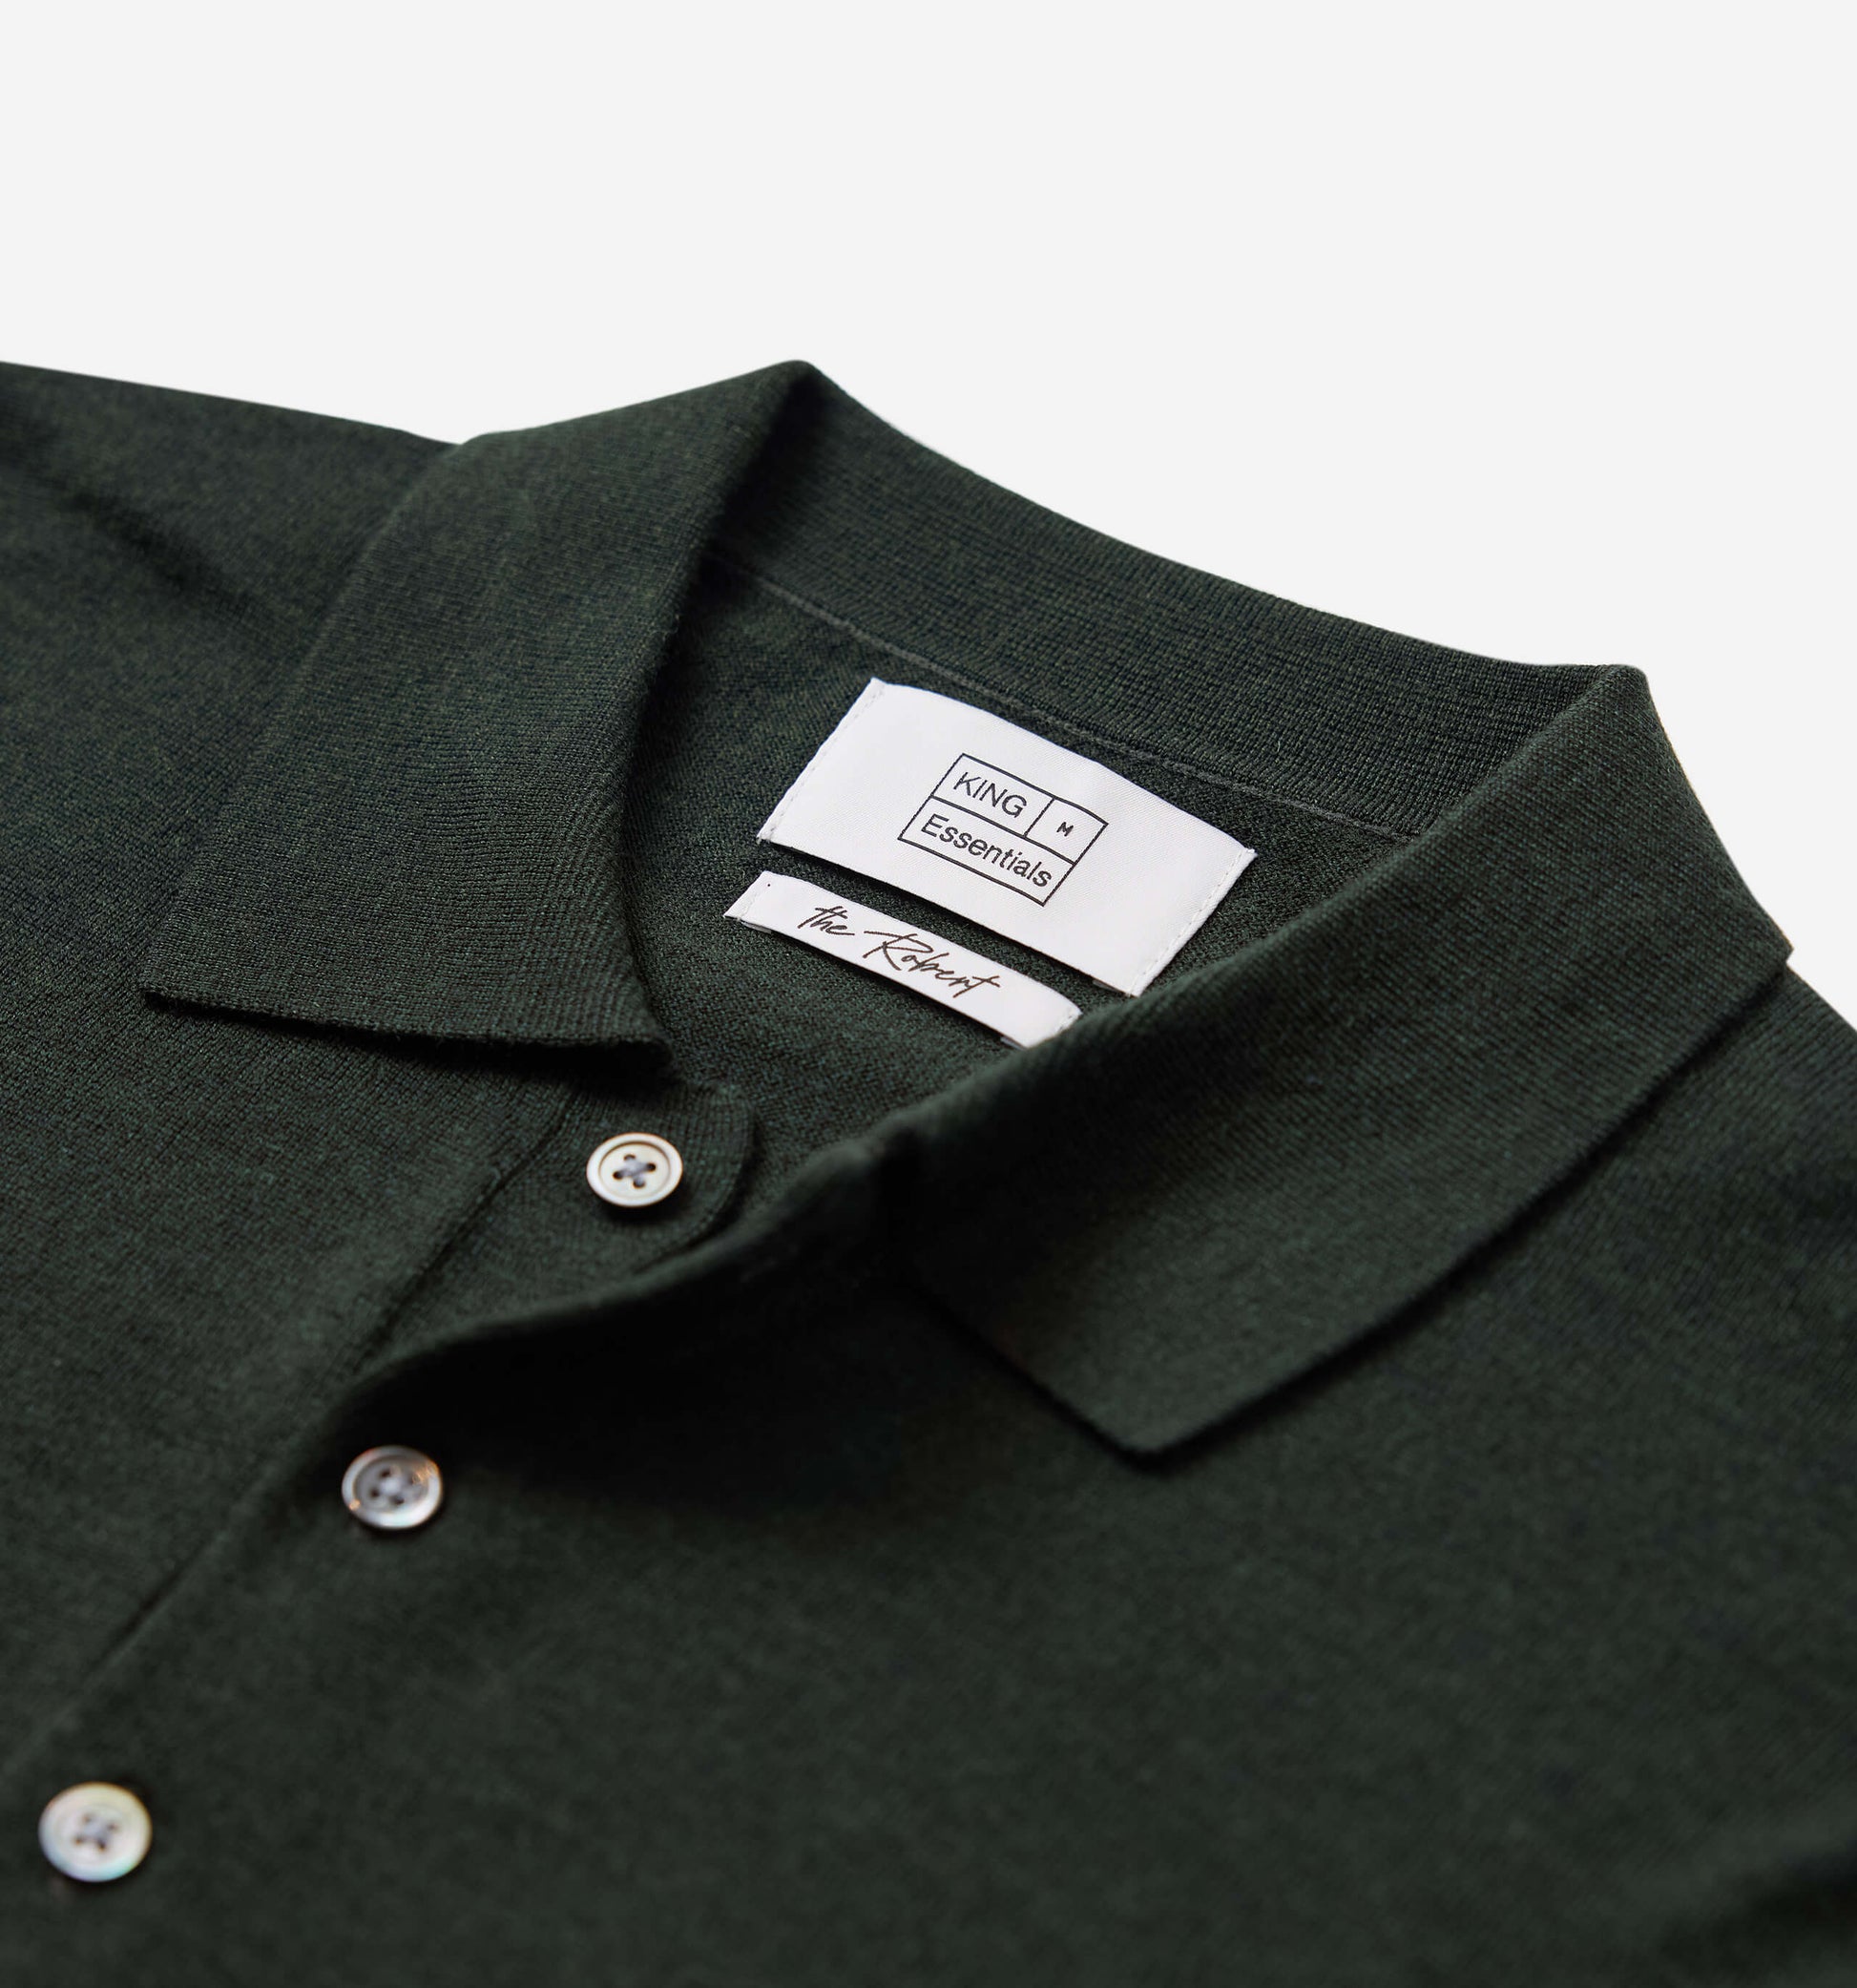 The Robert - Merino Wool Polo In Dark Green From King Essentials